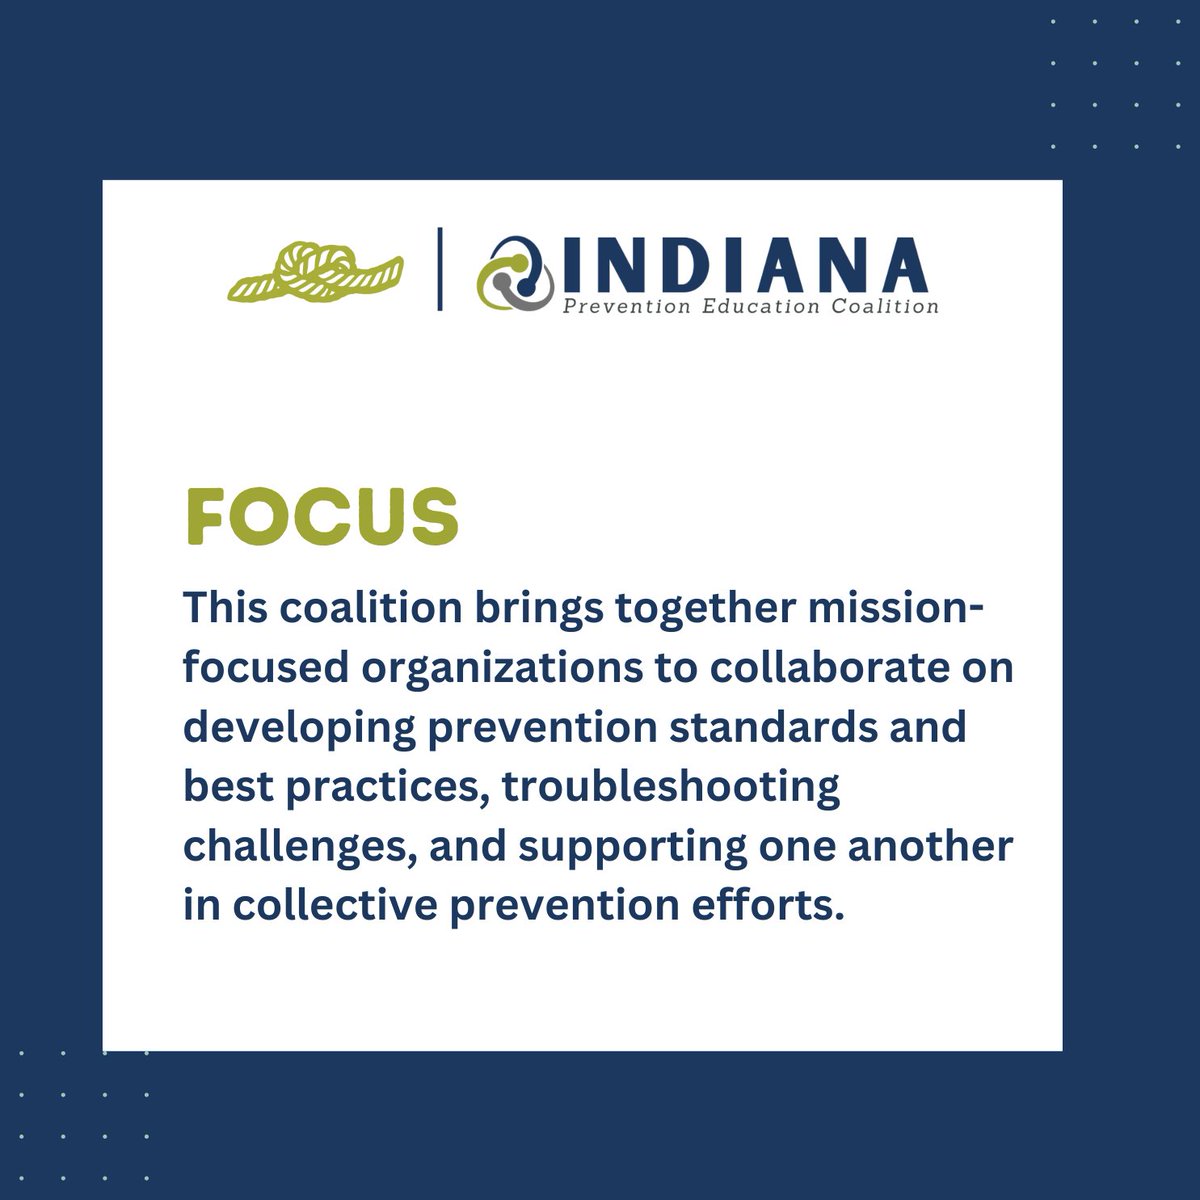 We are excited to announce the launch of the Indiana Prevention Education Coalition! 34 orgs united to empower students with vital in-school child abuse prevention education. The Coalition will set standards, share best practices, and support each other to prevent abuse. #IPEC